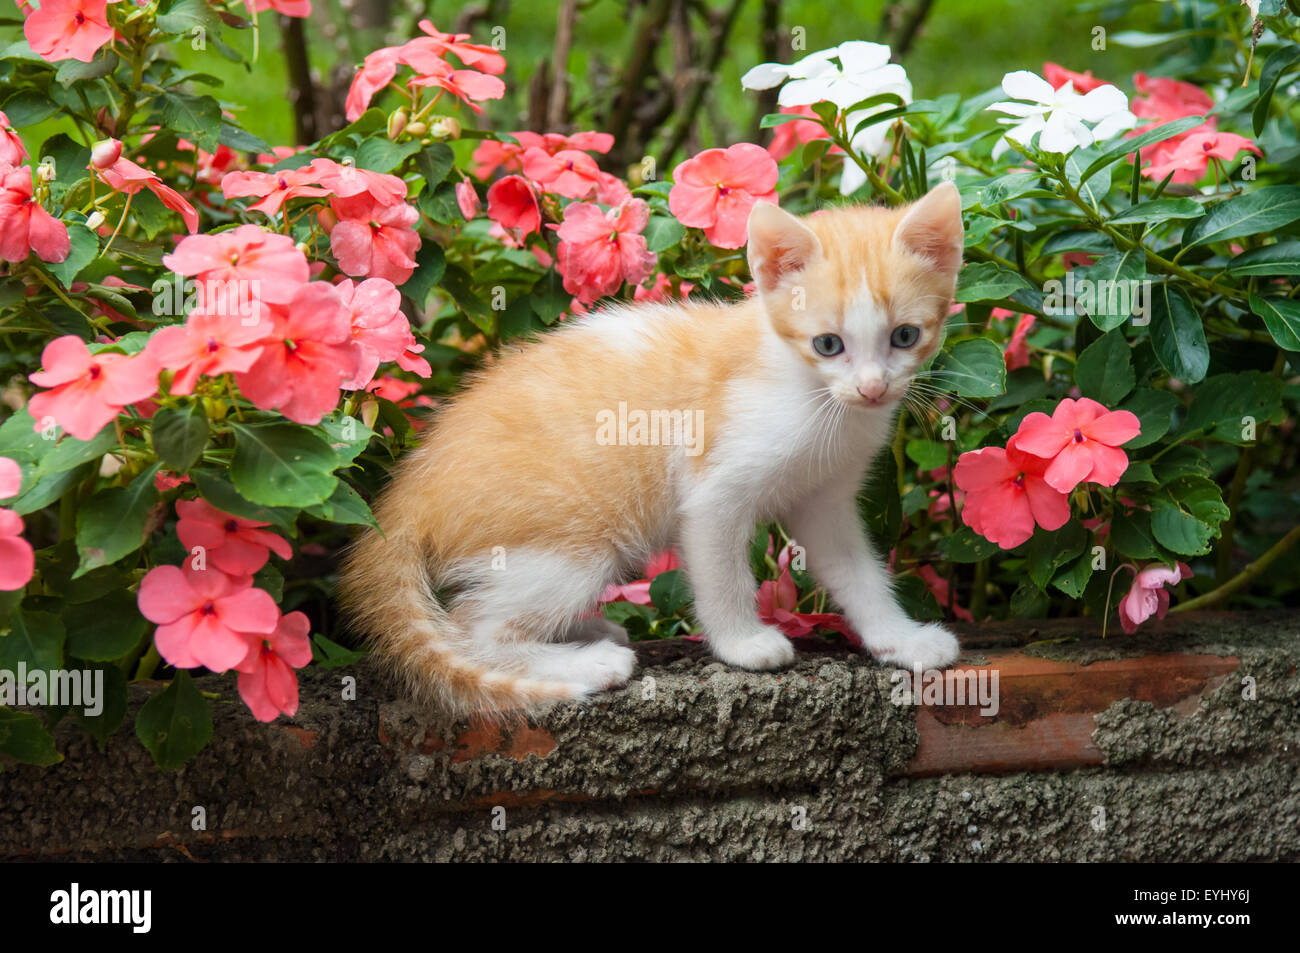 Parana, Brazil. Kitten on a wall with pink periwinkle flowers. Stock Photo